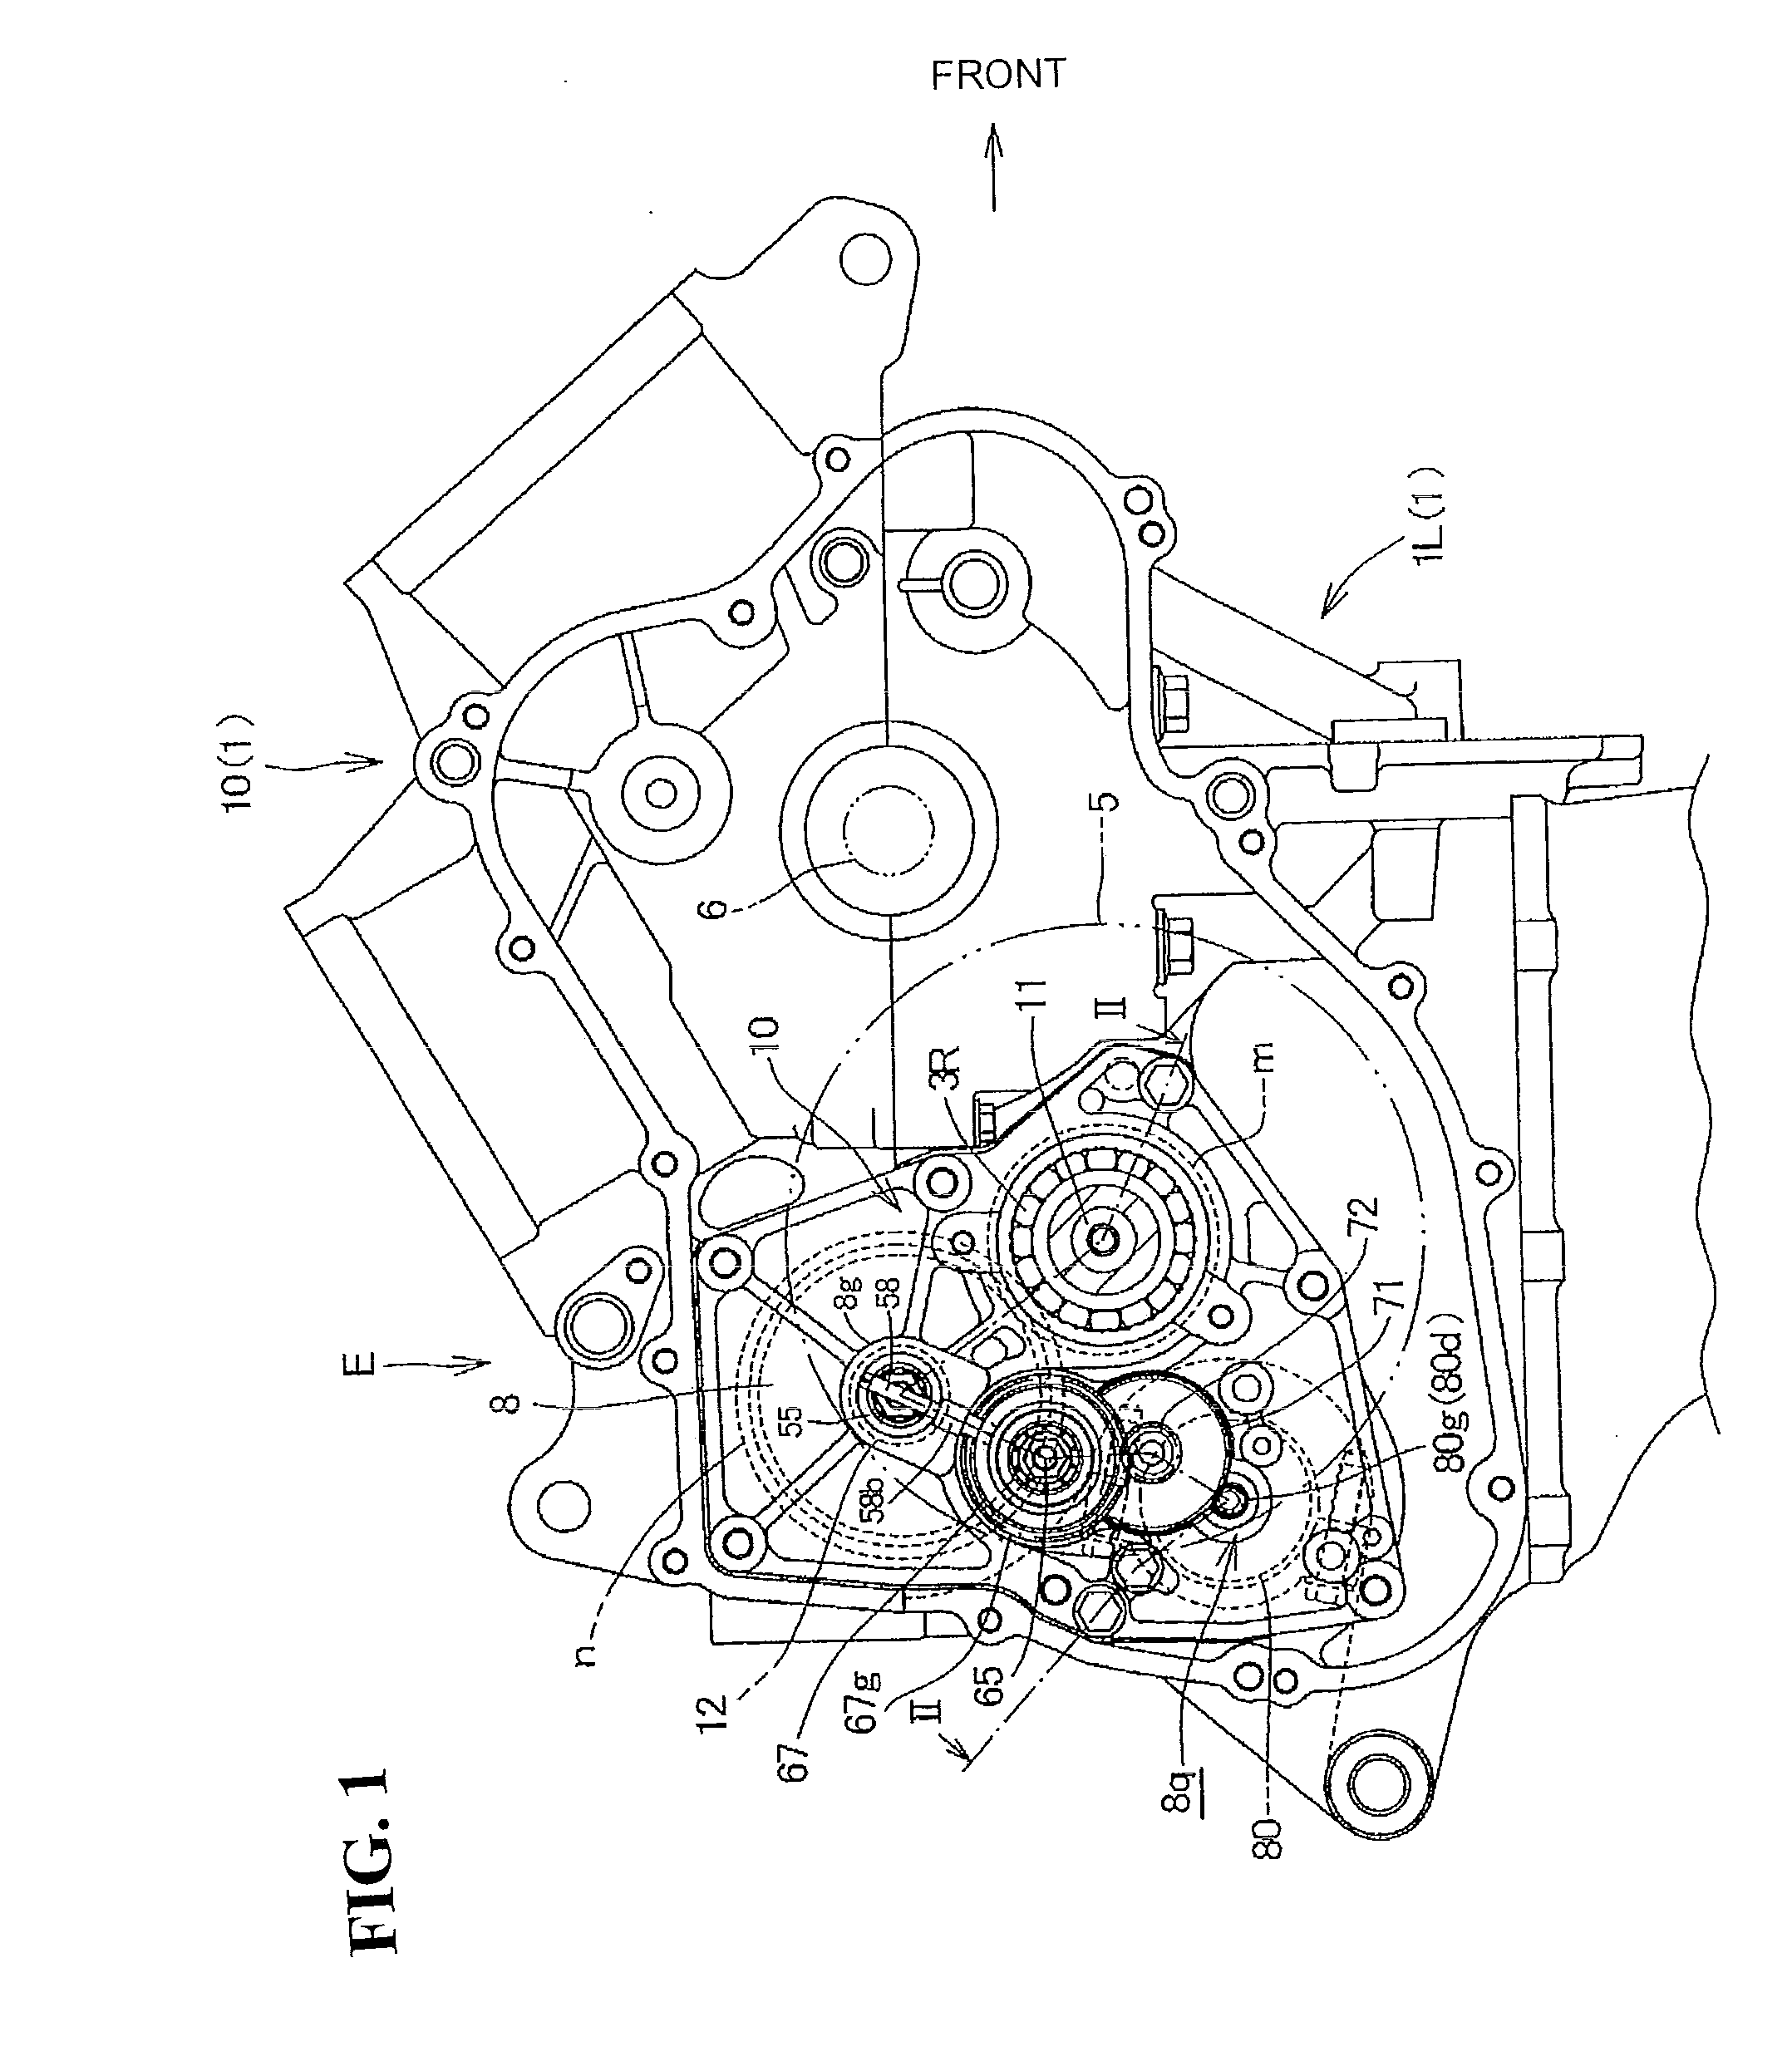 Arrangement structure of shifting actuator of internal combustion engine mounted on motorcycle